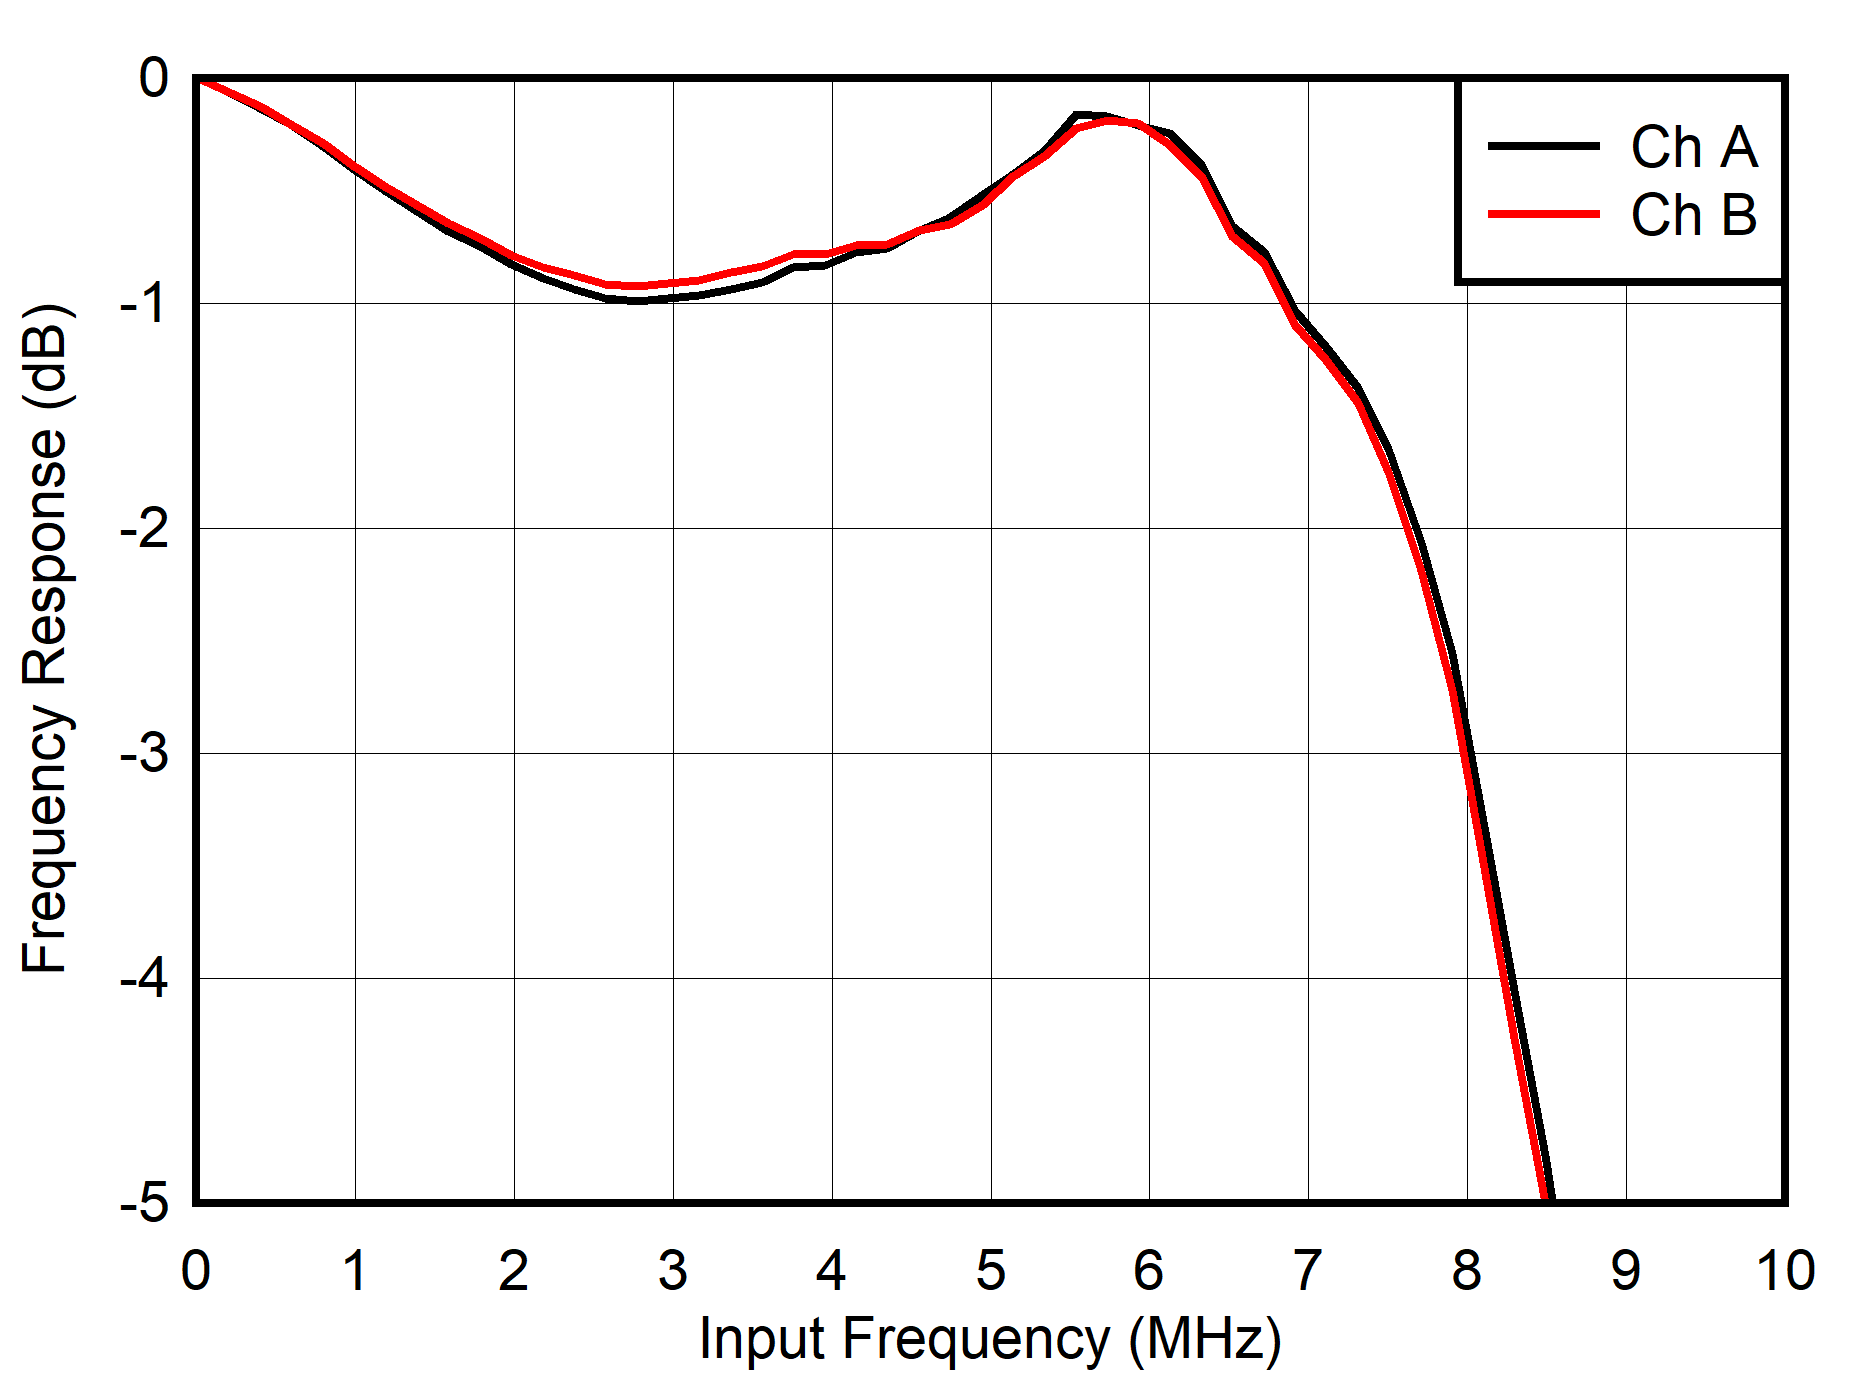 ADC12DJ4000RF Input
                        Response vs Input Frequency (zoomed)